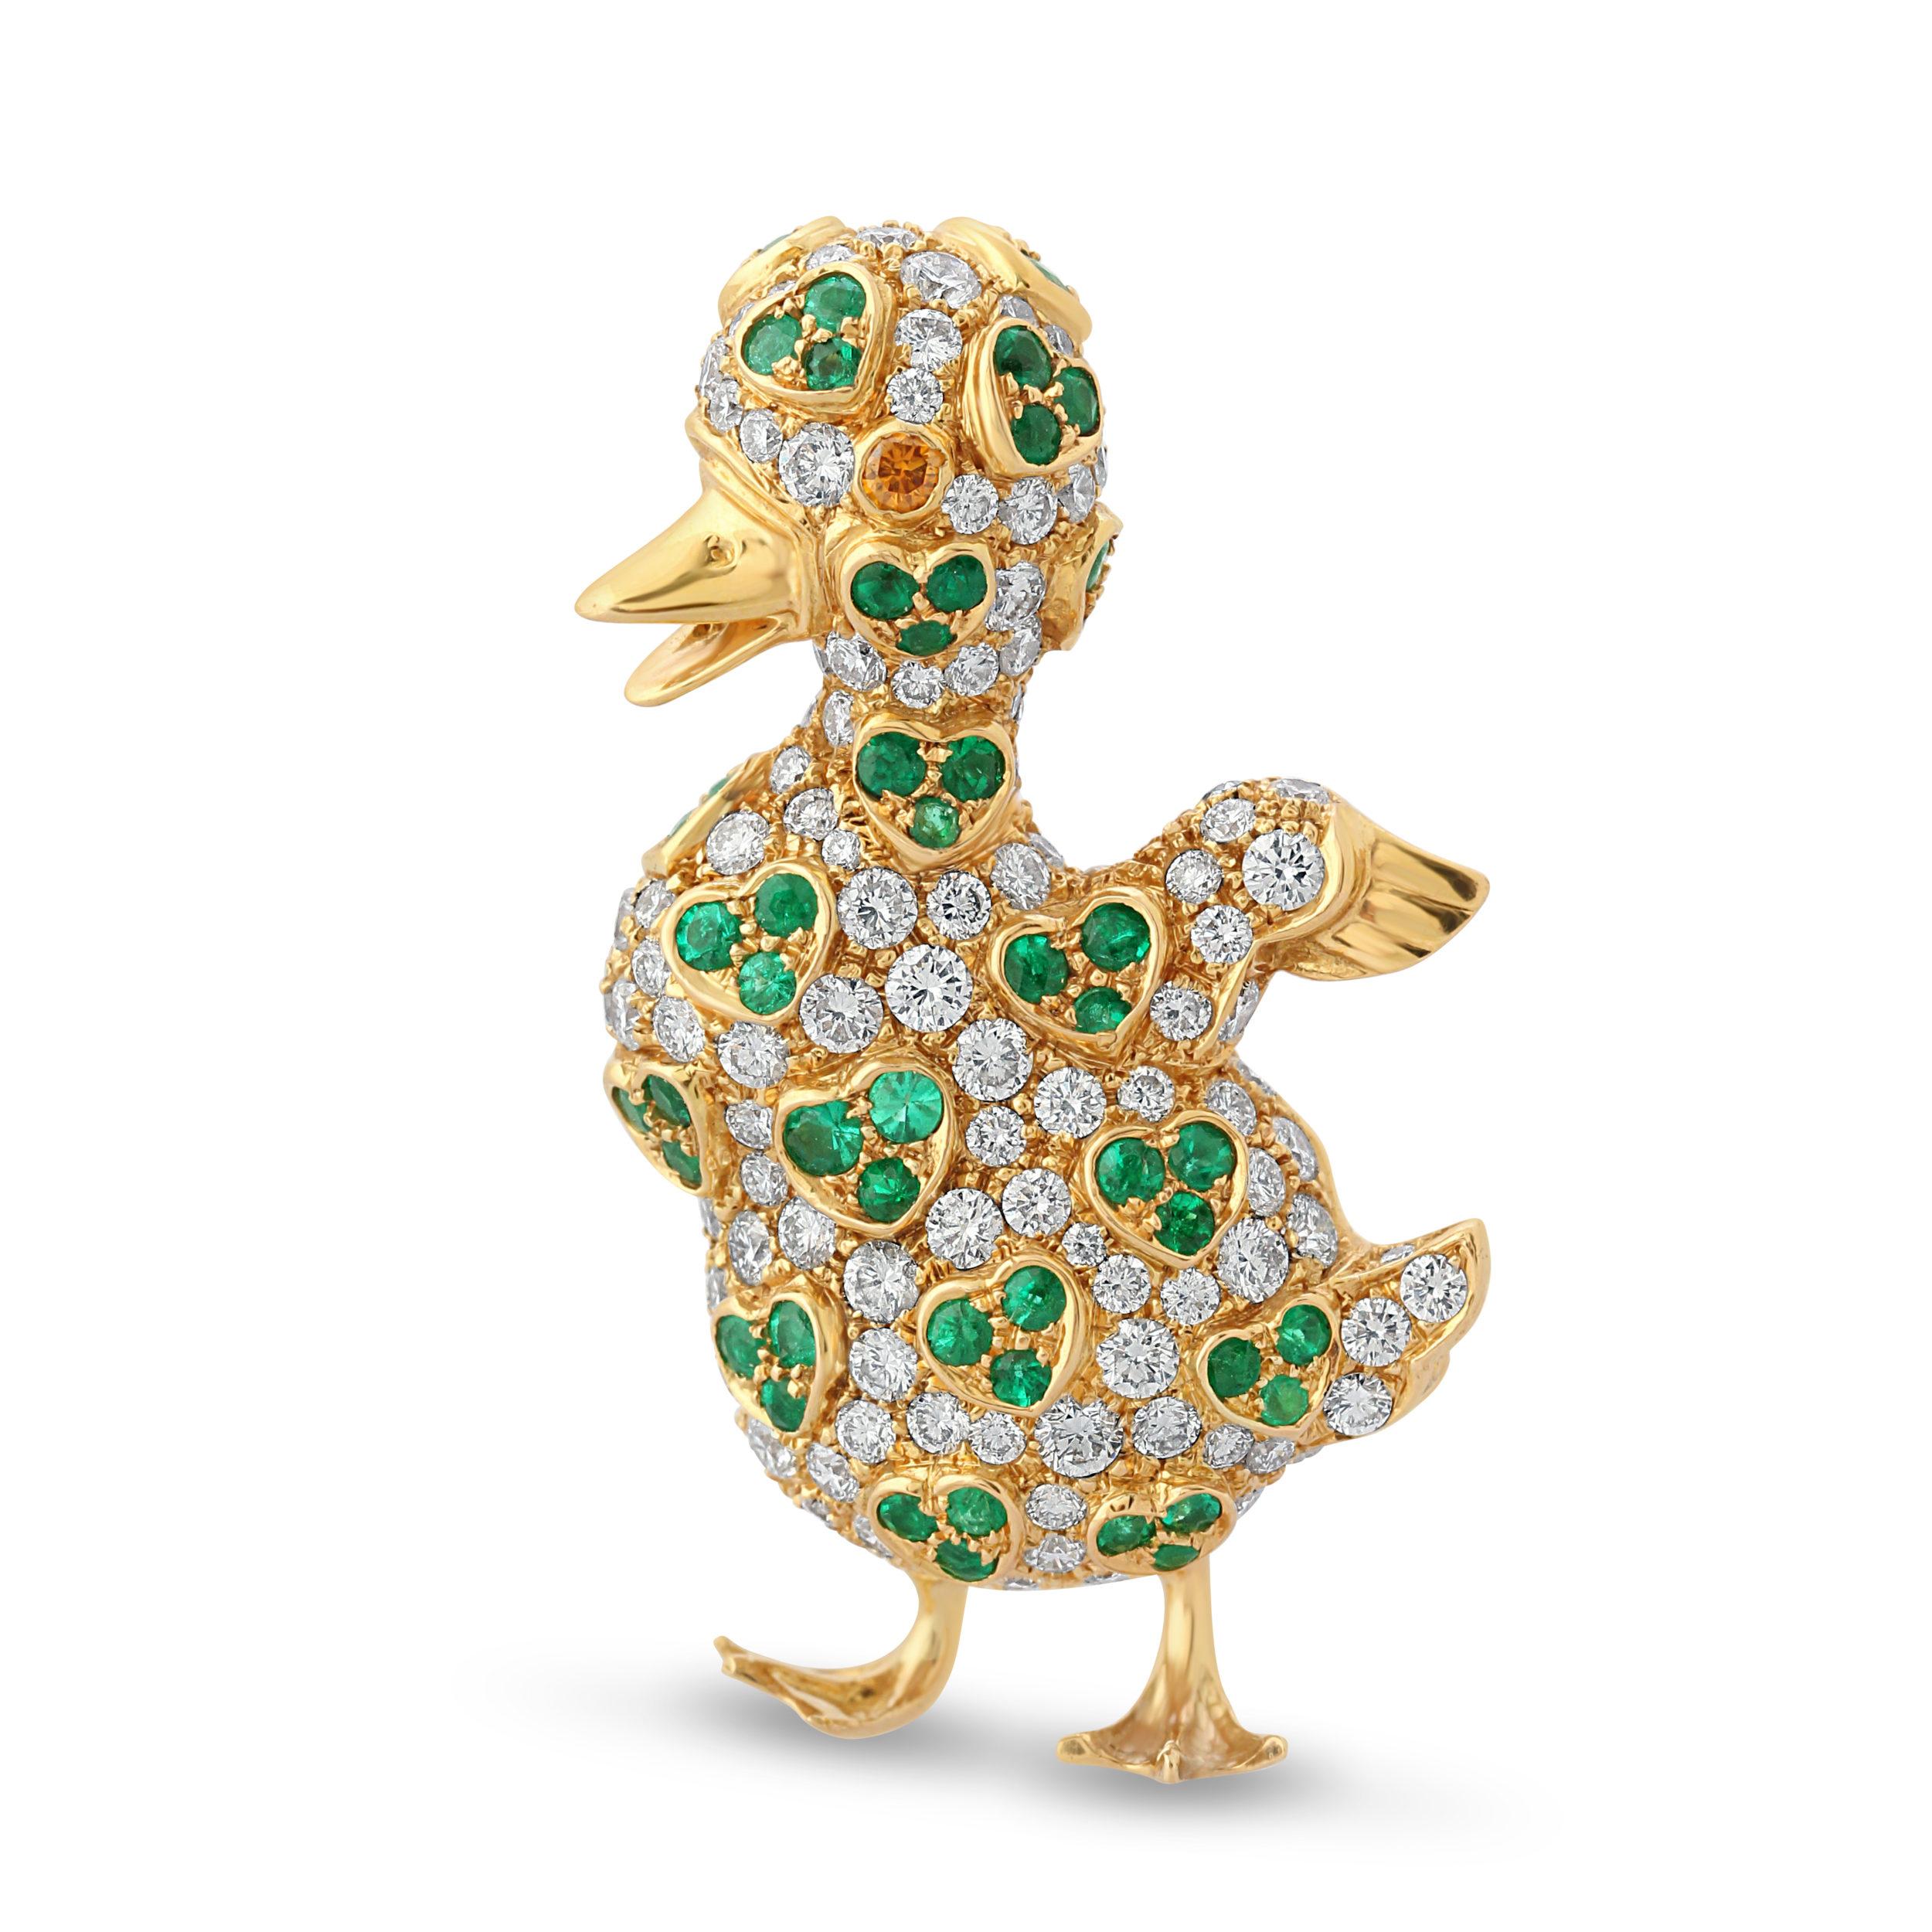 A delightful duck brooch by Reza. Set with 1.11 carats of emeralds in repeating heart motifs surrounded by round brilliant-cut diamonds with a fancy yellow diamond eye. Total diamond weight = 2.59 carats.